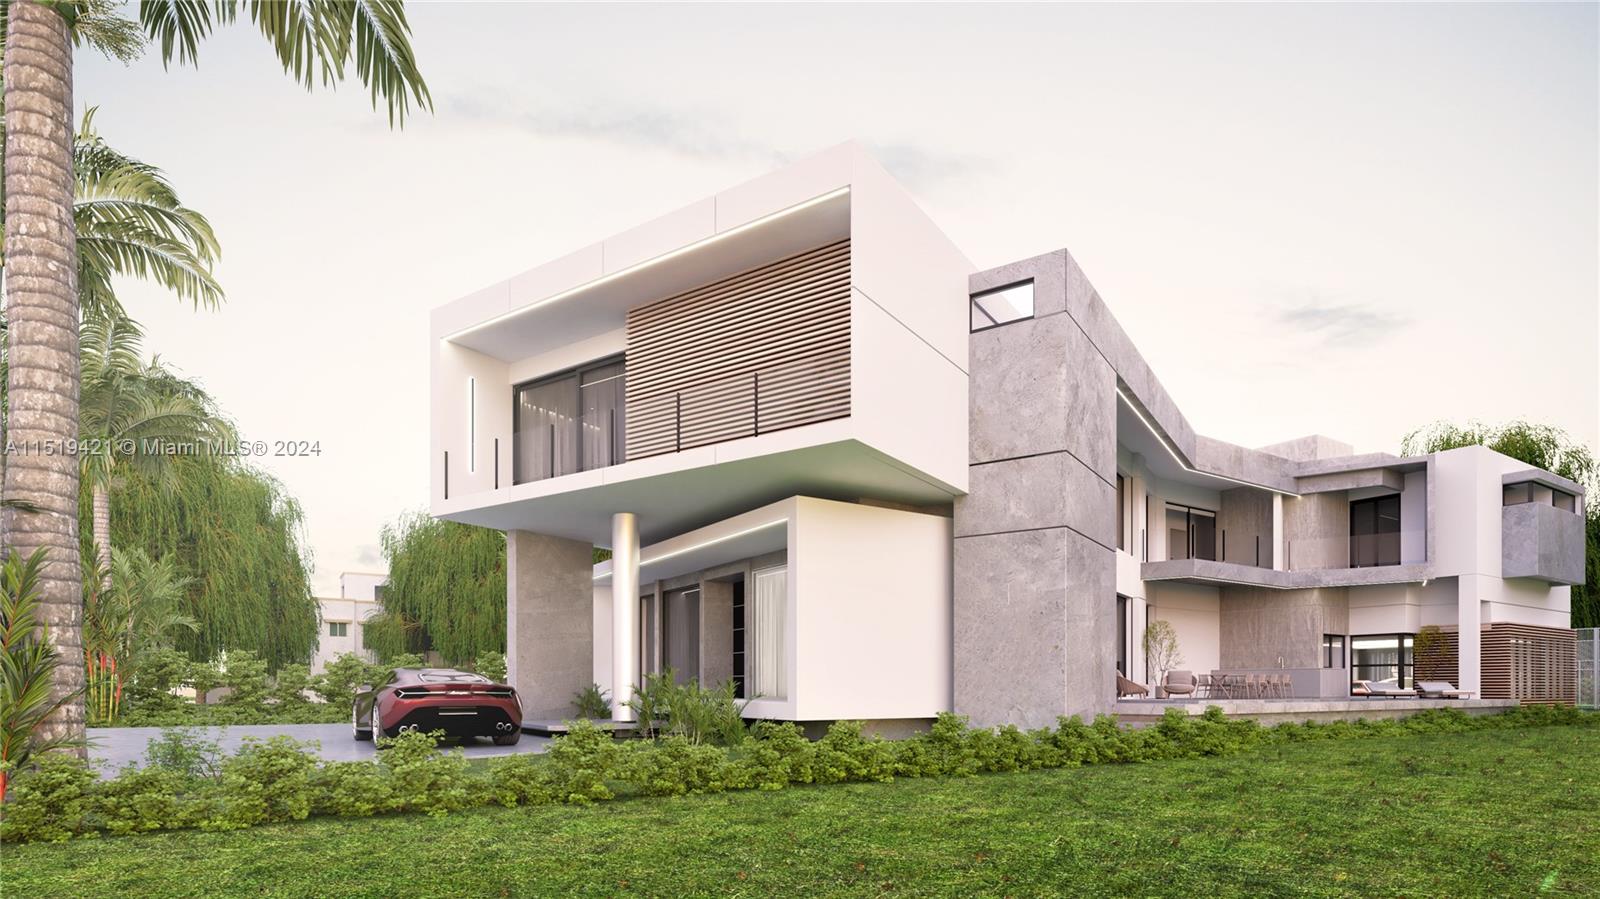 This pre-construction marvel on South Miami Avenue transcends mere residence; it embodies unmatched luxury and visionary design. With an expansive 10,625 sq ft total lot area and 6 bedrooms, it stands not just as a home but as an architectural masterpiece. Featuring a 2-car garage under AC, a 2-car carport, and an extraordinary 8 extra parking spaces (a rarity of 12 parking spaces in total) Beyond the standard, this development boasts 9 bathrooms, Additional highlights include a gym, sauna, an elevator, an office space, a mini-golf area, and even an electrical power plant, ensuring uninterrupted living.This home is crafted to offer the pinnacle of comfort, style, and convenience. Welcome to a new standard of living on South Miami Avenue, where rarity meets opulence. Completion: April 2025